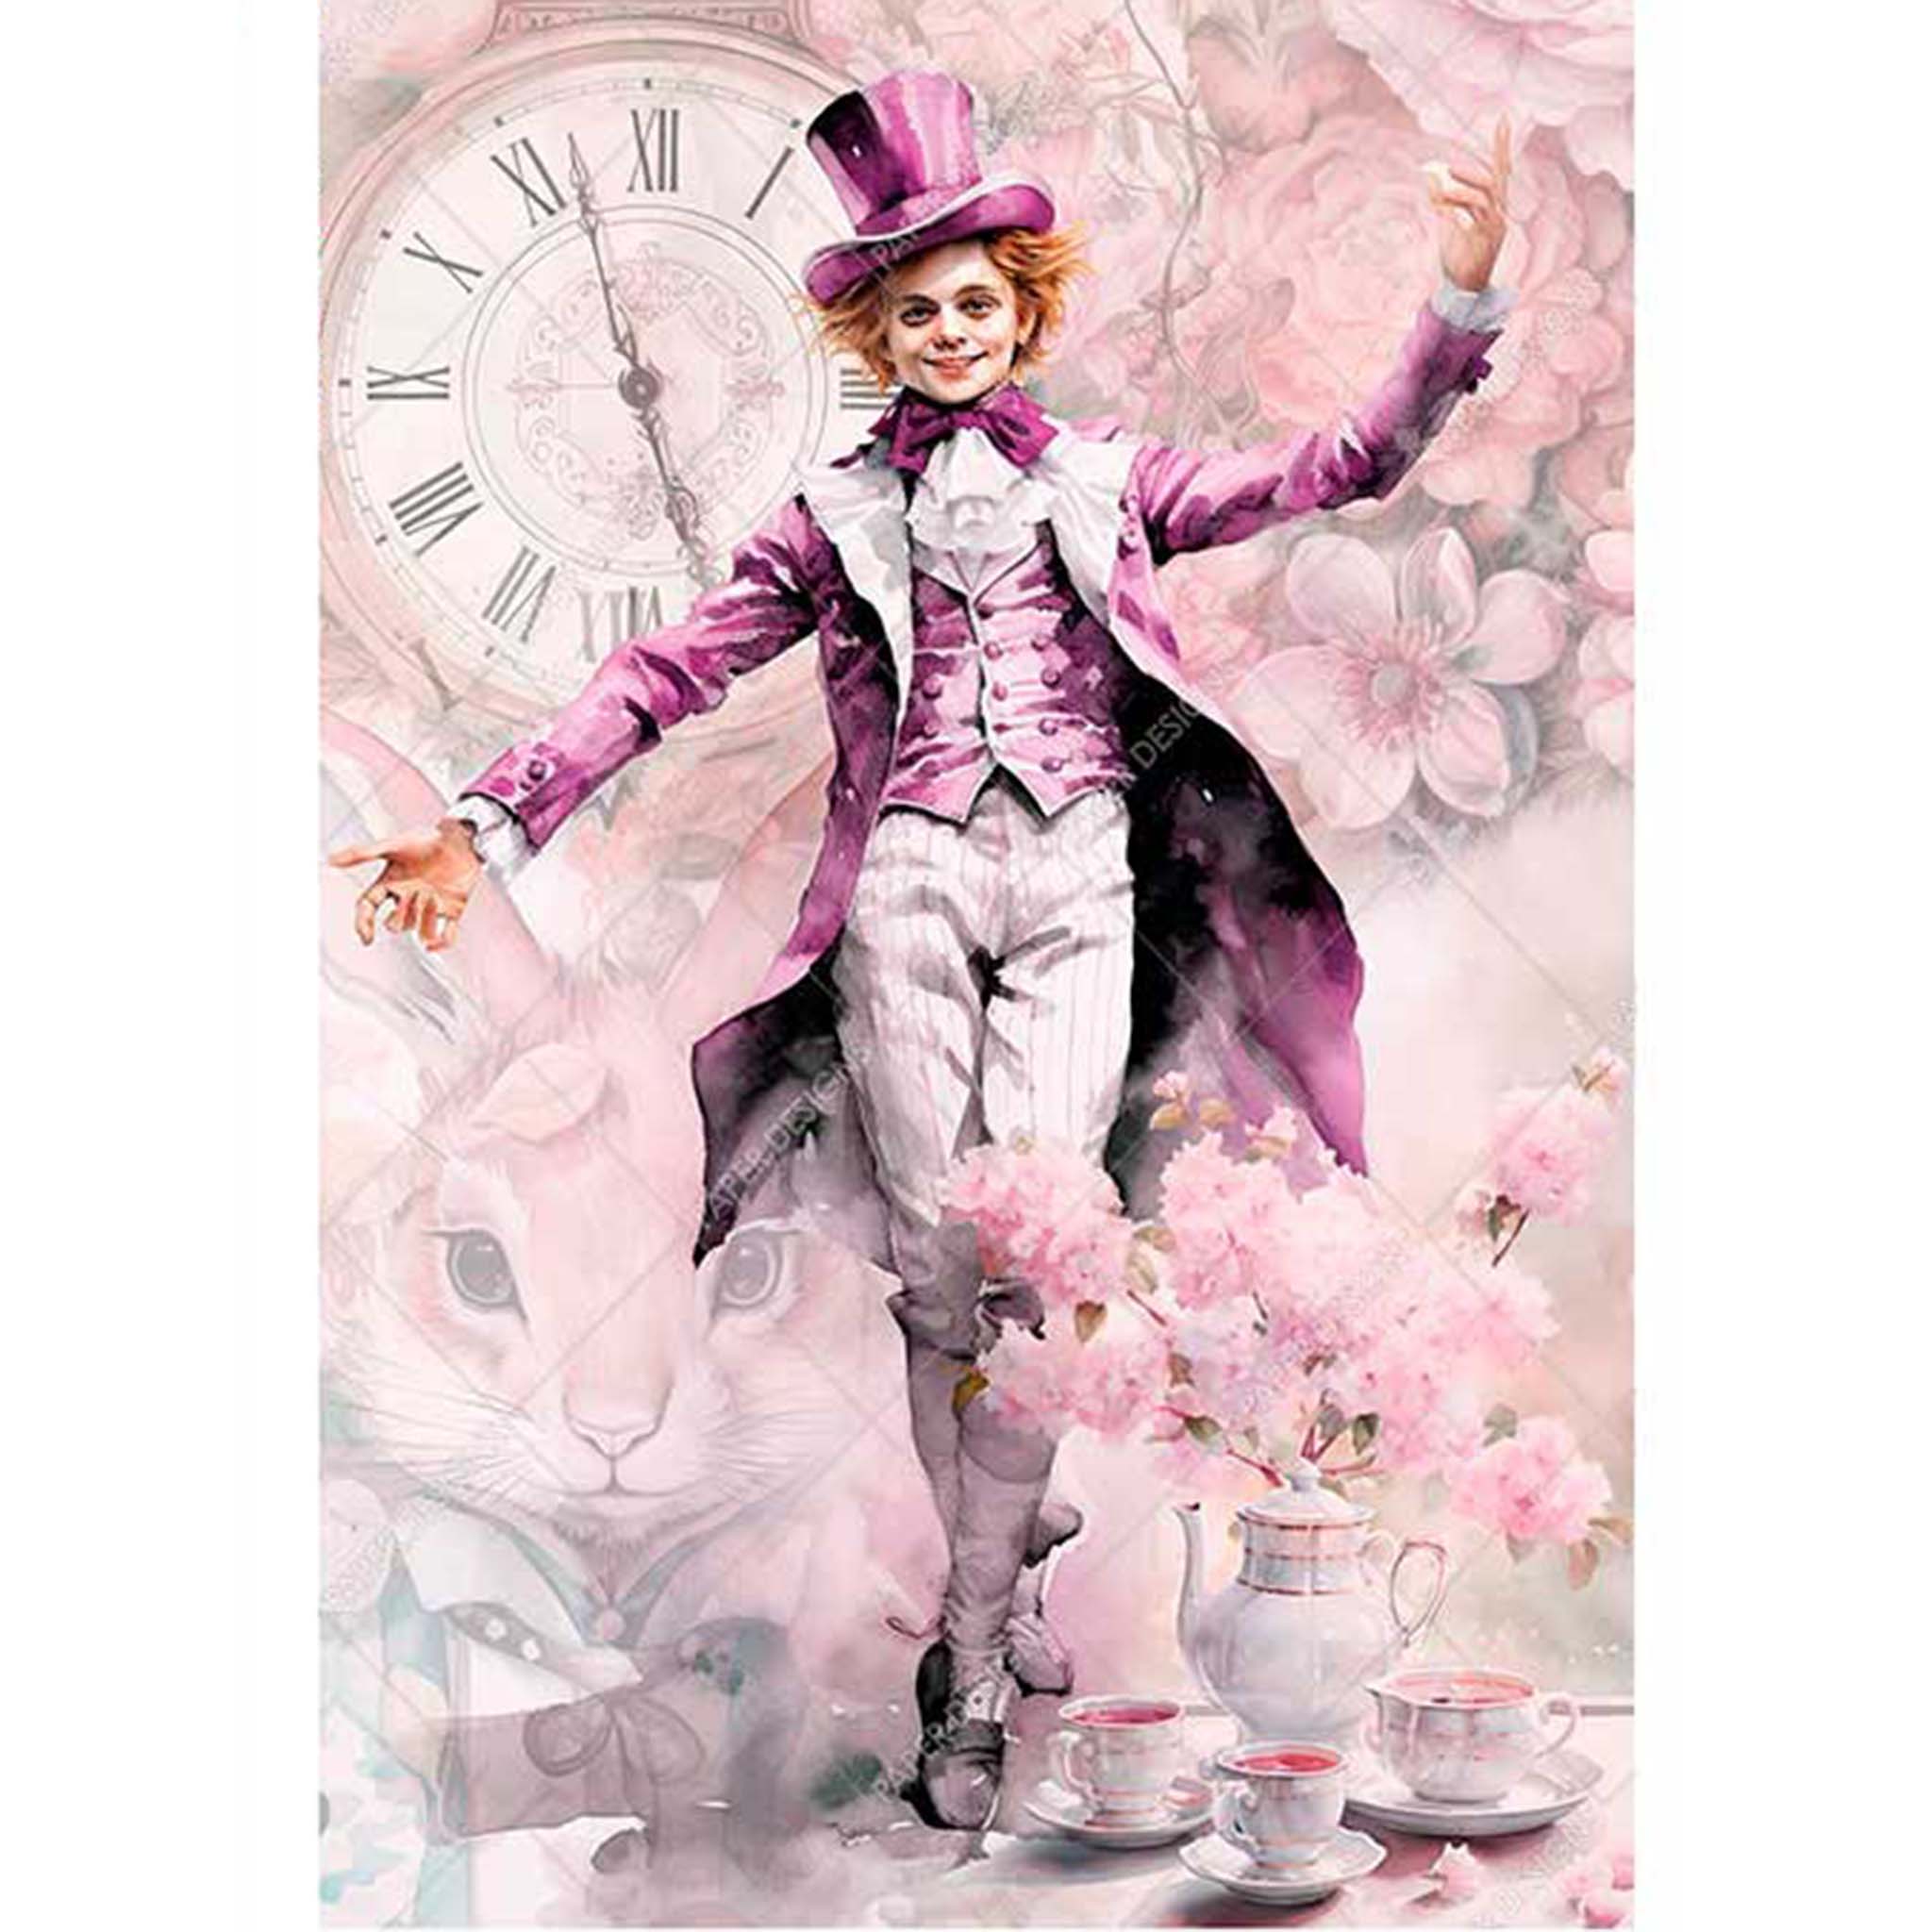 A2 rice paper design featuring The Mad Hatter and a tea set against a large clock face and rabit face in front of a pink floral background. White borders are on the sides.